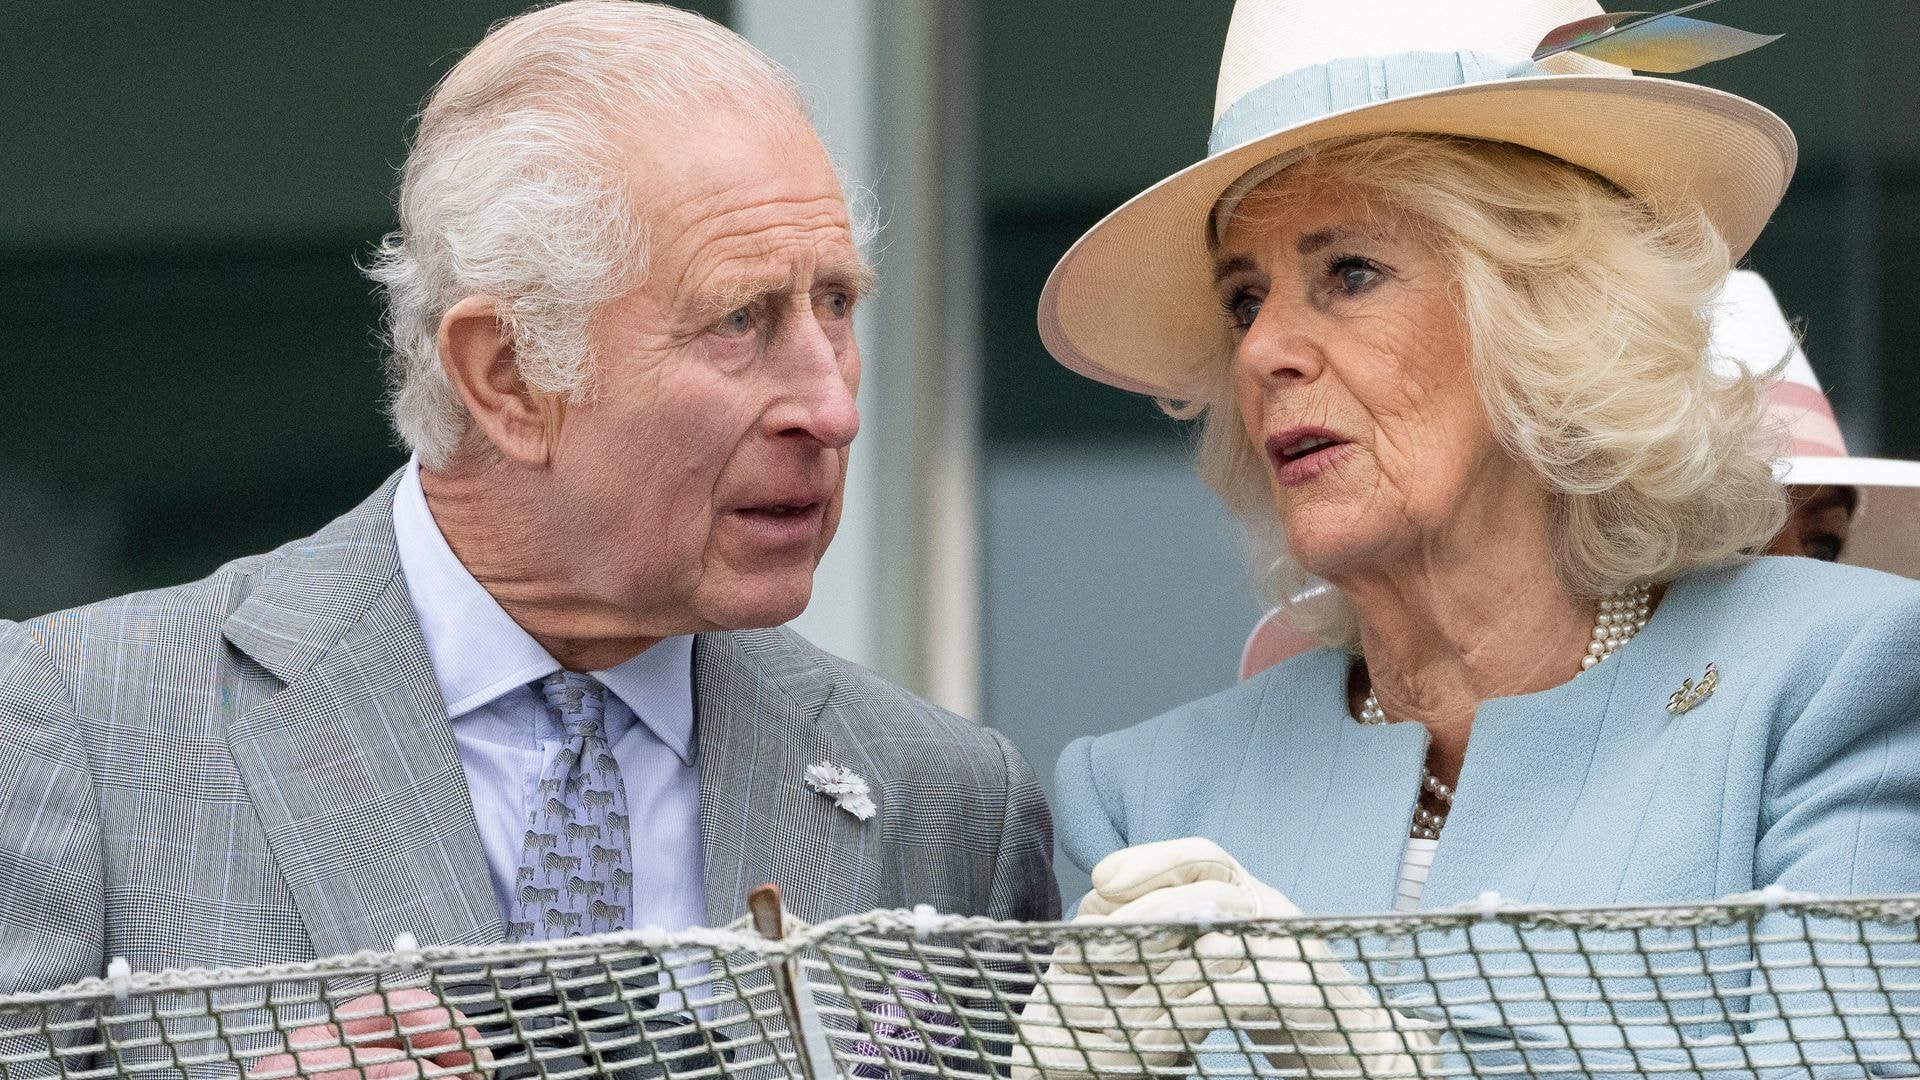 King Charles and Queen Camilla looking concerned